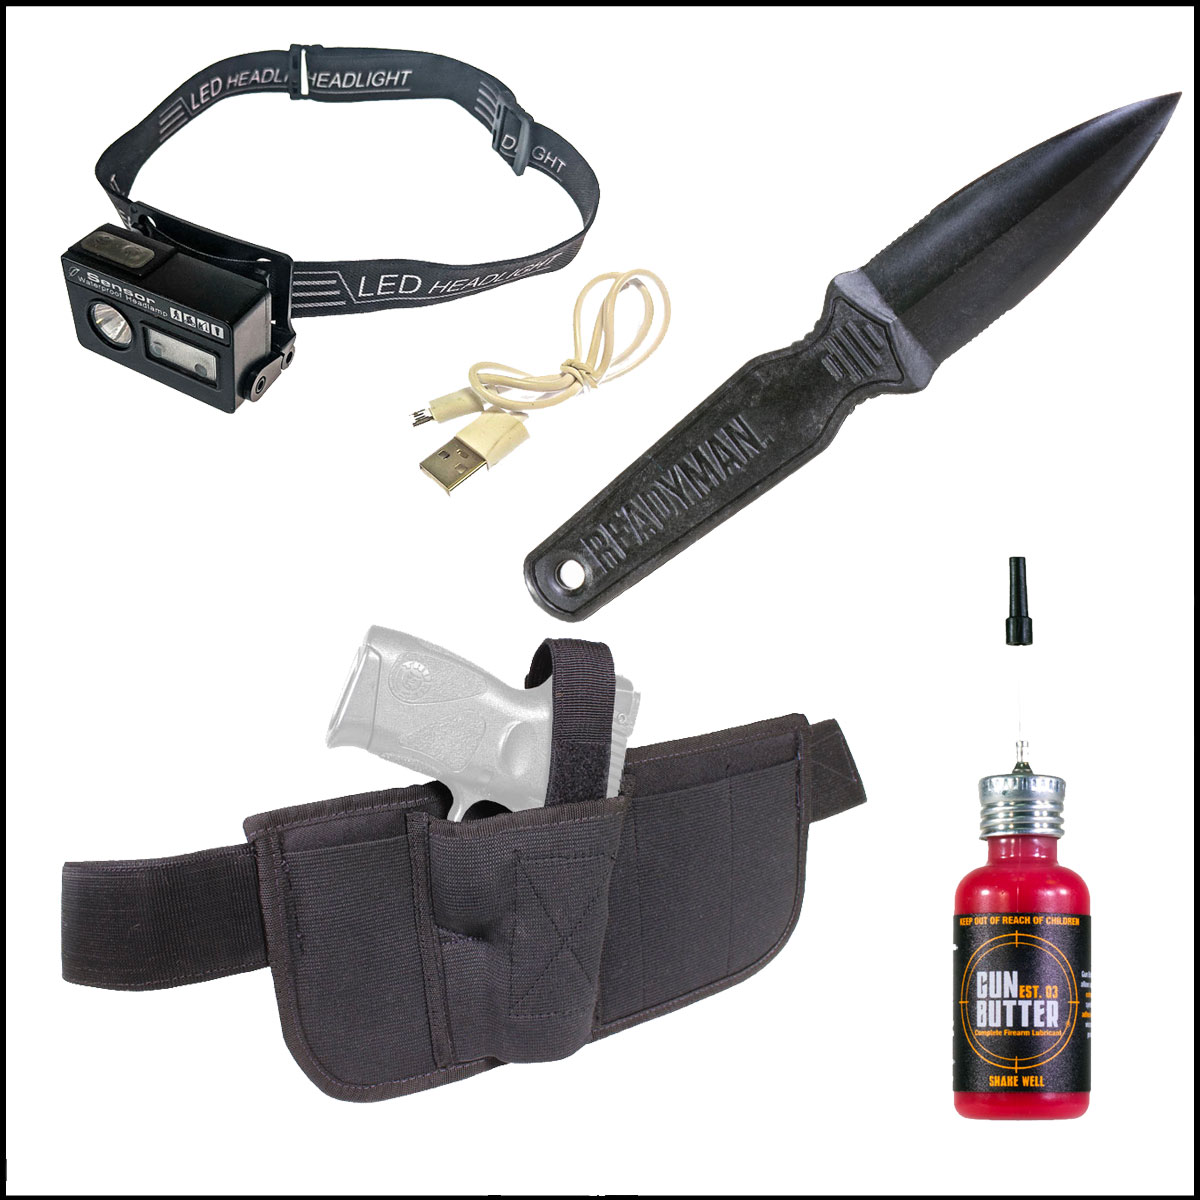 Tactical Gift Box: Gun Butter Complete Firearm Lubricant  + Ready Man CIA Letter Opener  + Brave Response Original Concealed Carry Holster  + Sona Enterprises Rechargeable Head Lamp Hat Clip   